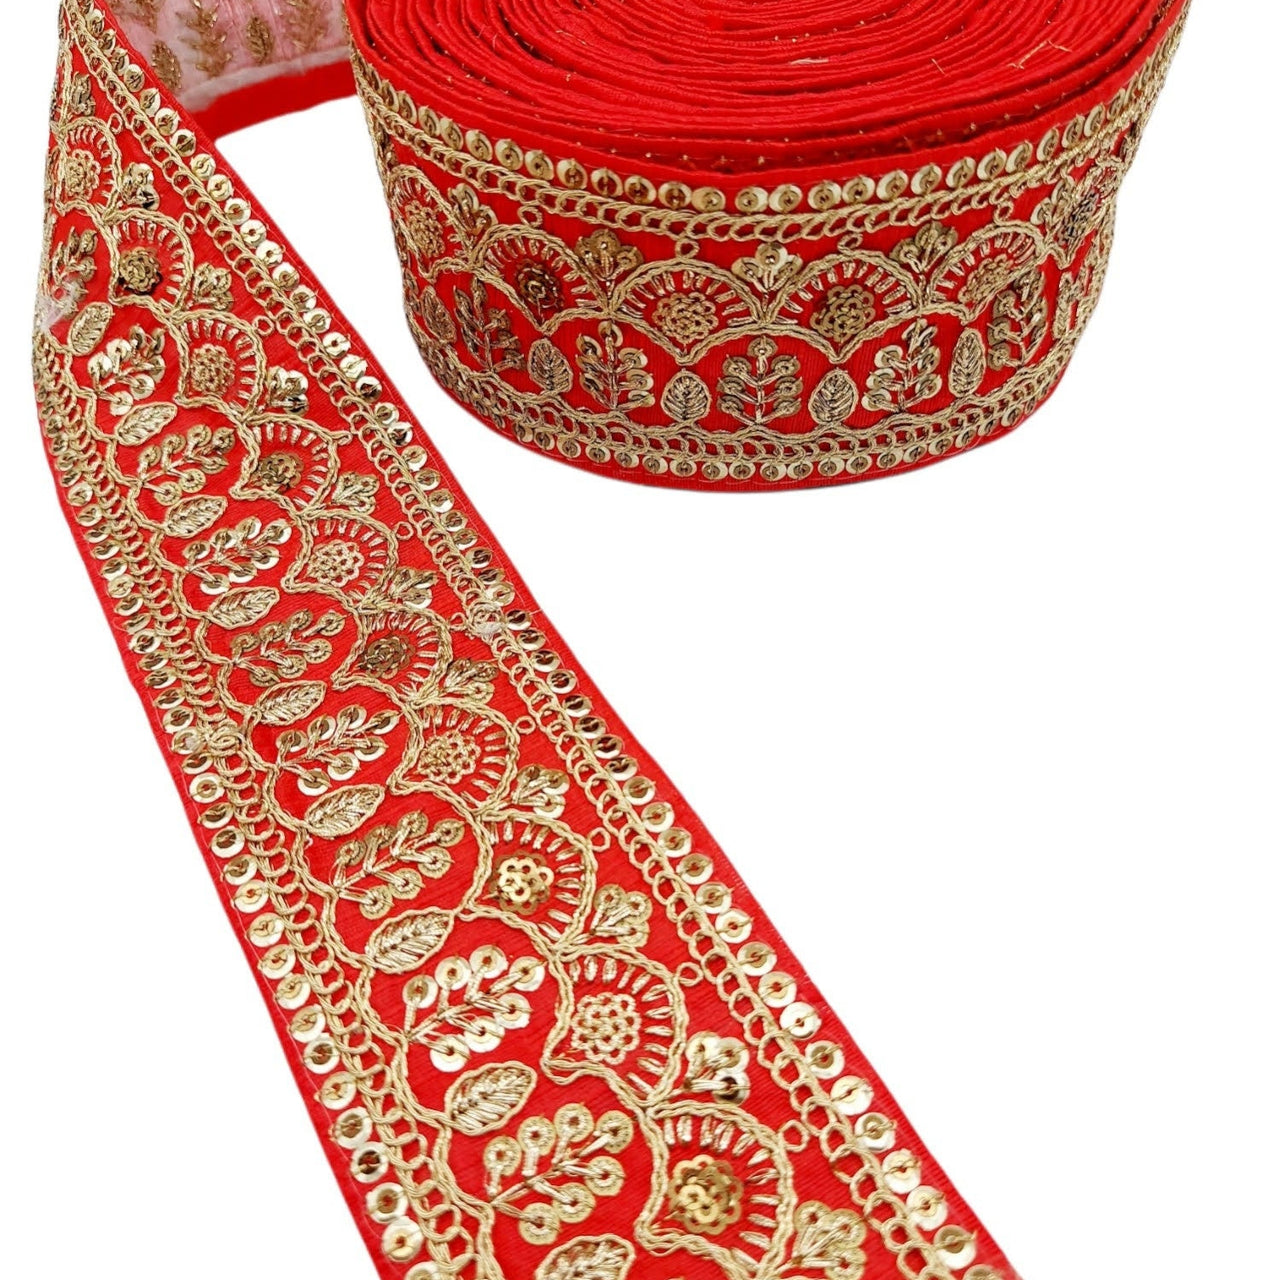 Red Gold Embroidered Lace Trim Sequins Trim 9 Yard Decorative Sari Border Costume Ribbon Crafting Sewing Tape